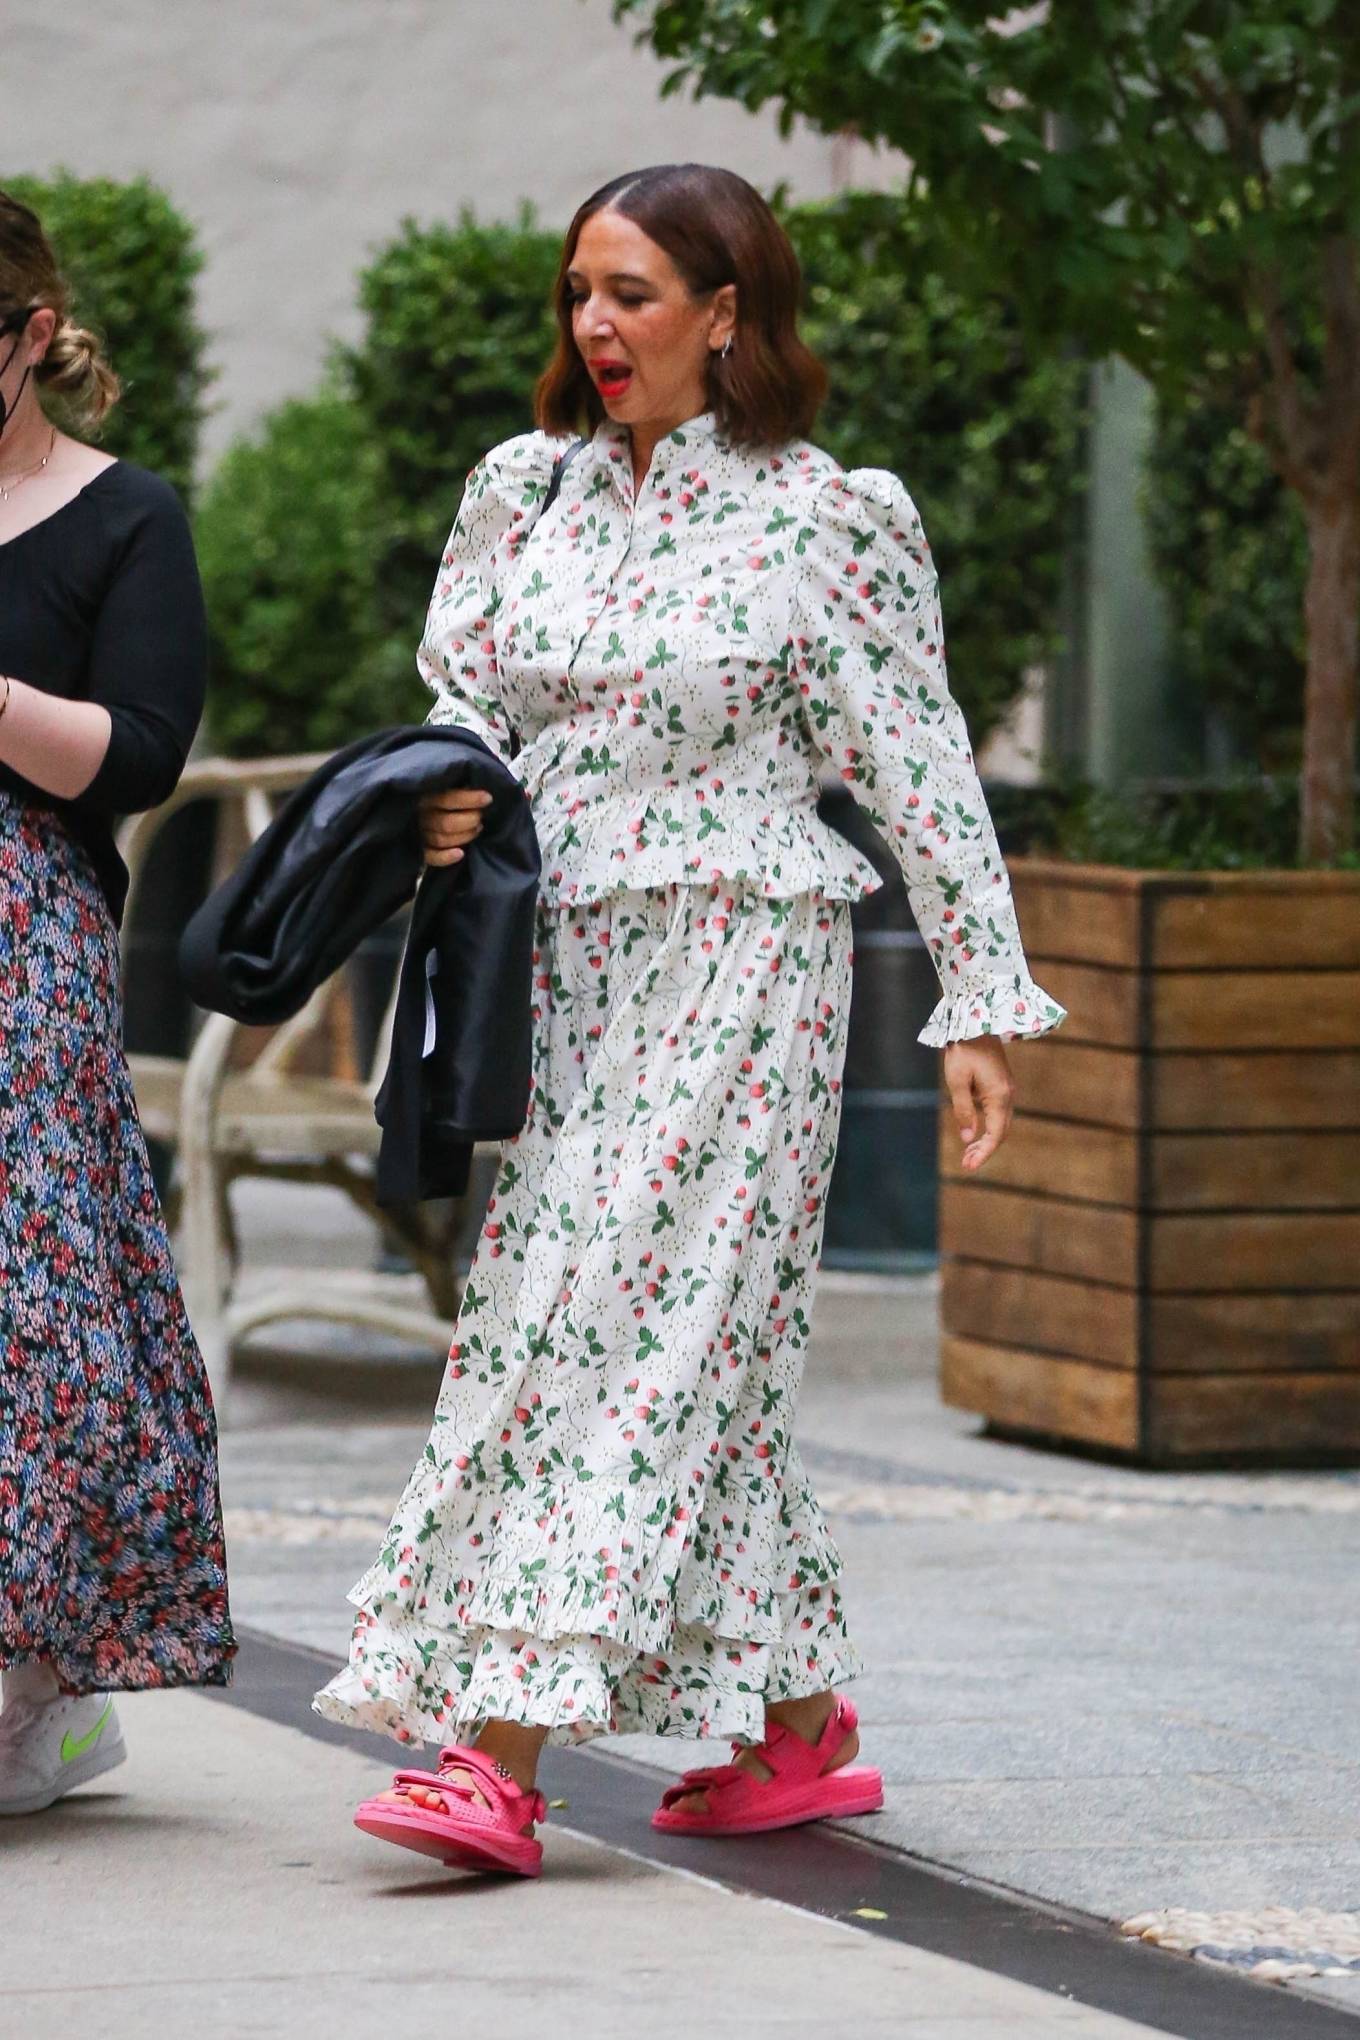 Maya Rudolph 2022 : Maya Rudolph – In a floral dress steps out in New York-08